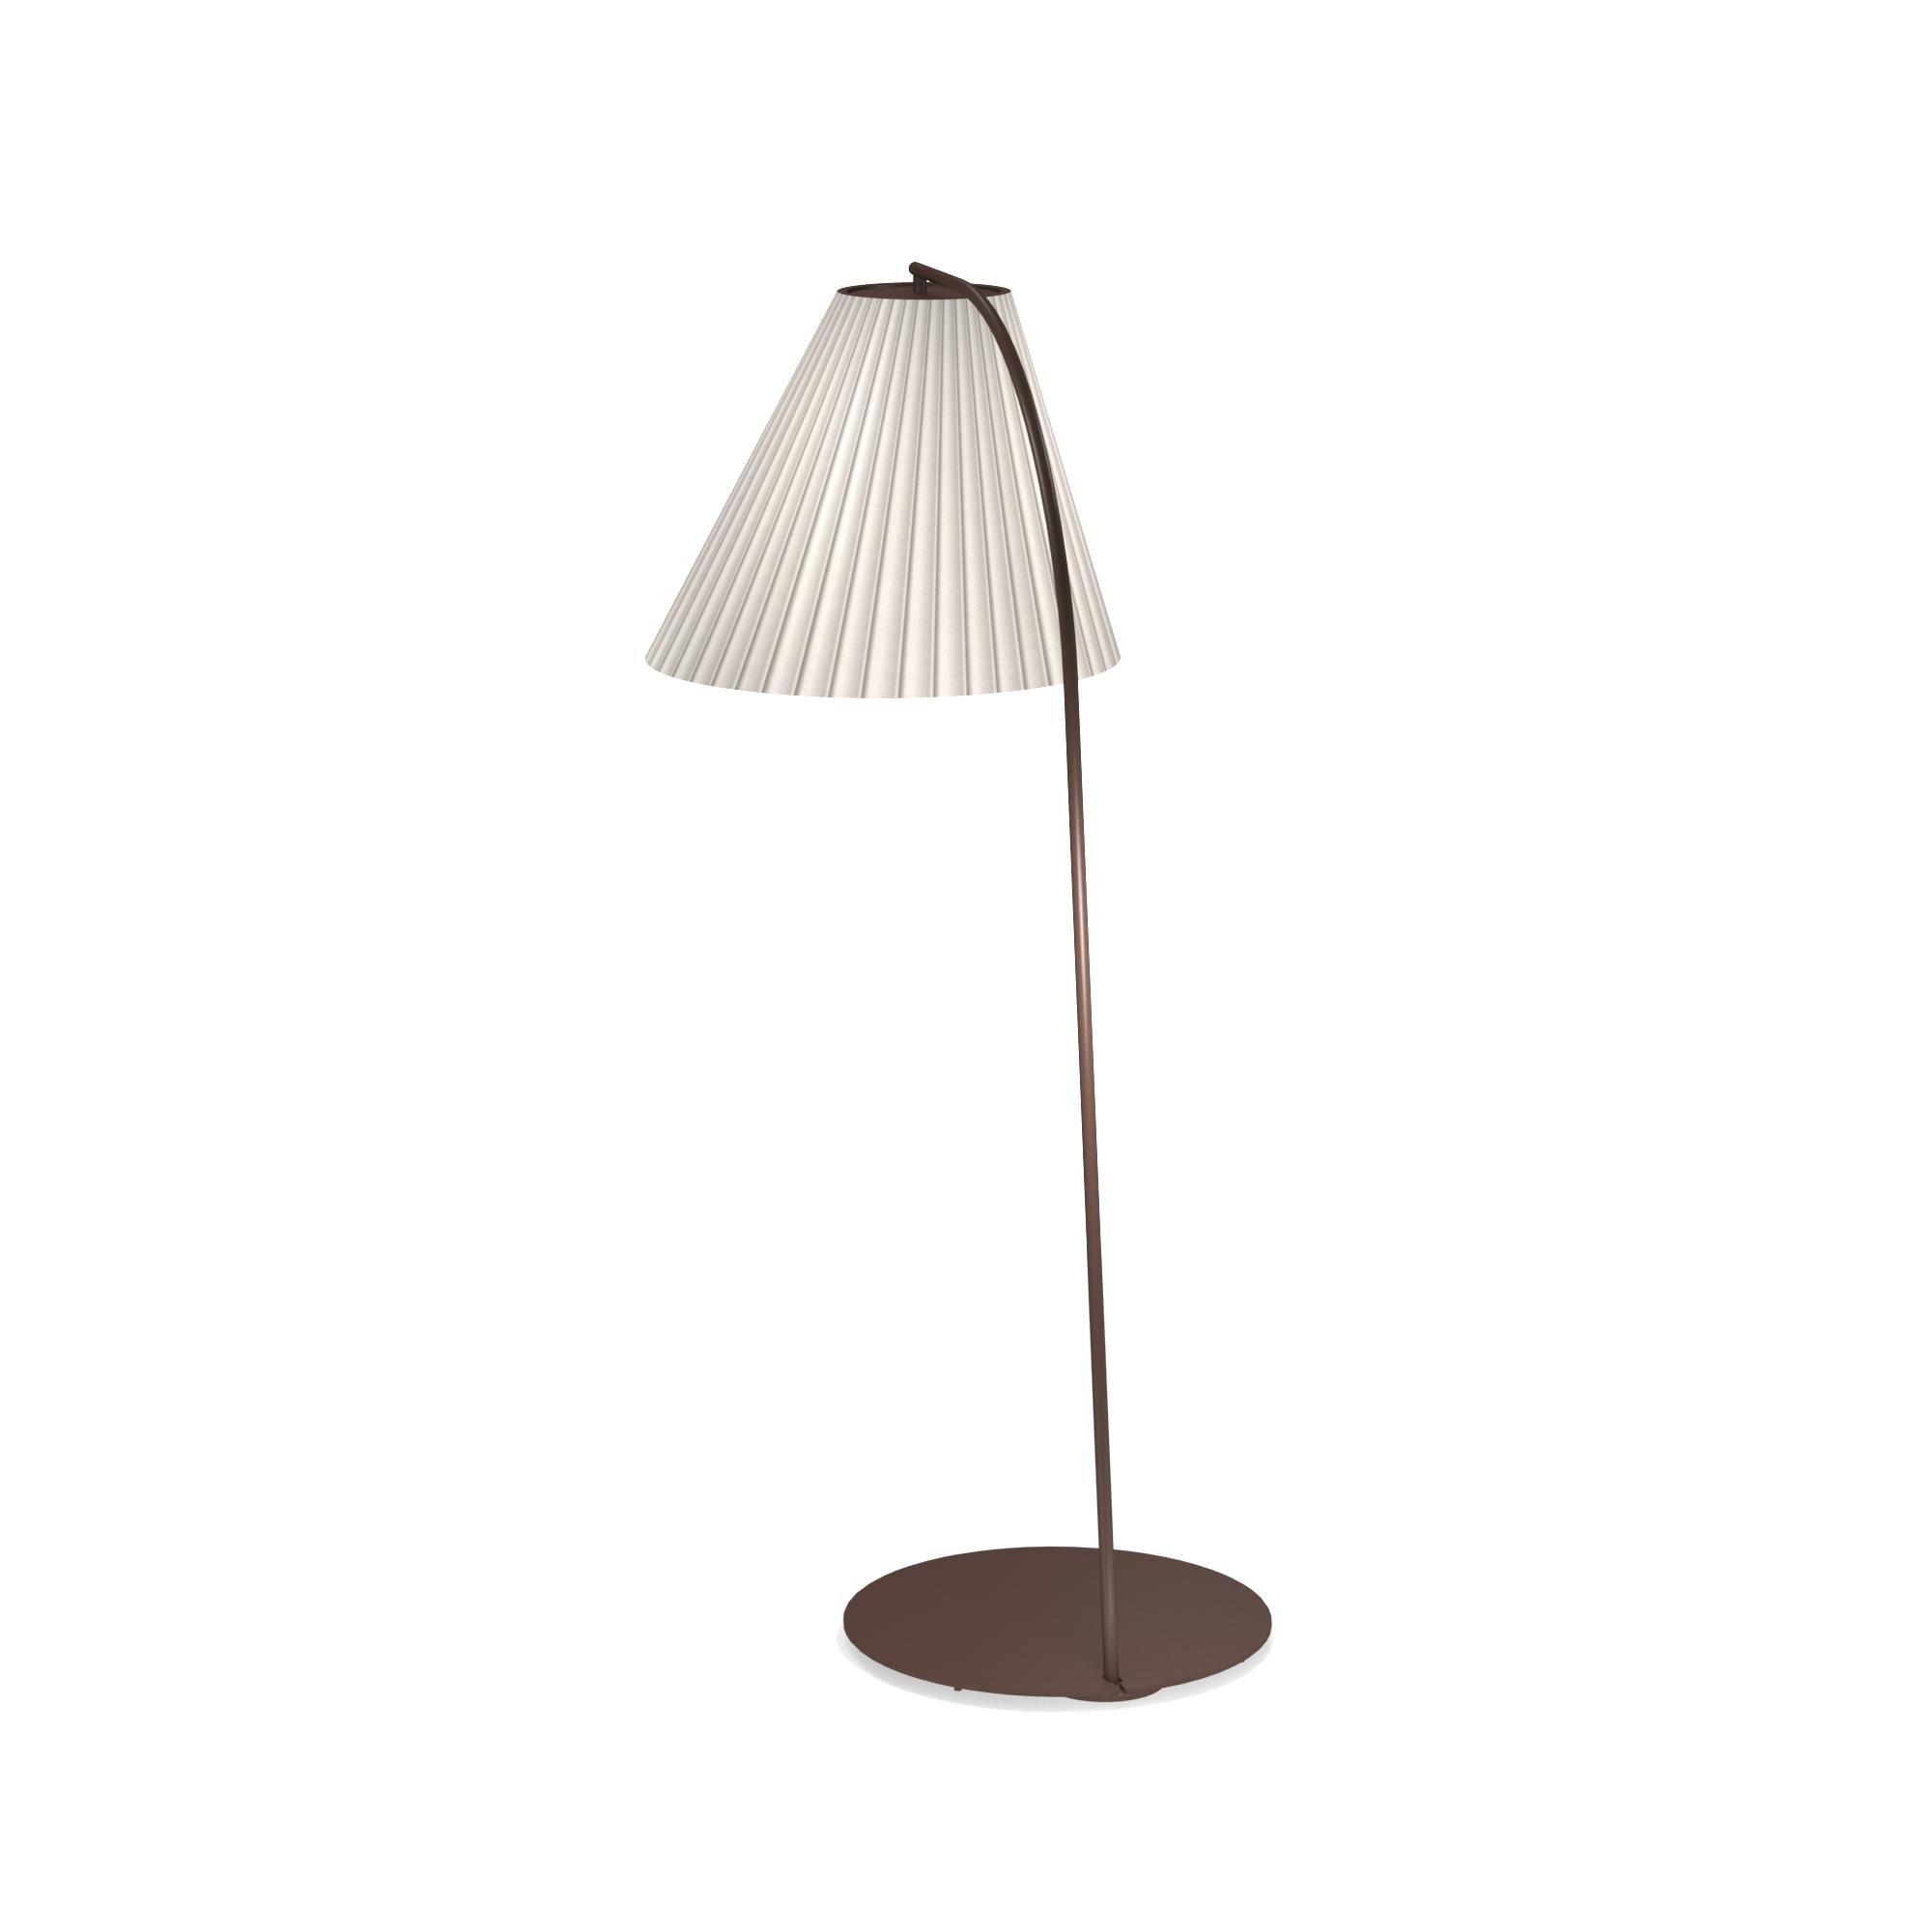 Garden Floor Lamp / Outside In Steel – Collection Cone Intended For Cone Floor Lamps (View 4 of 15)